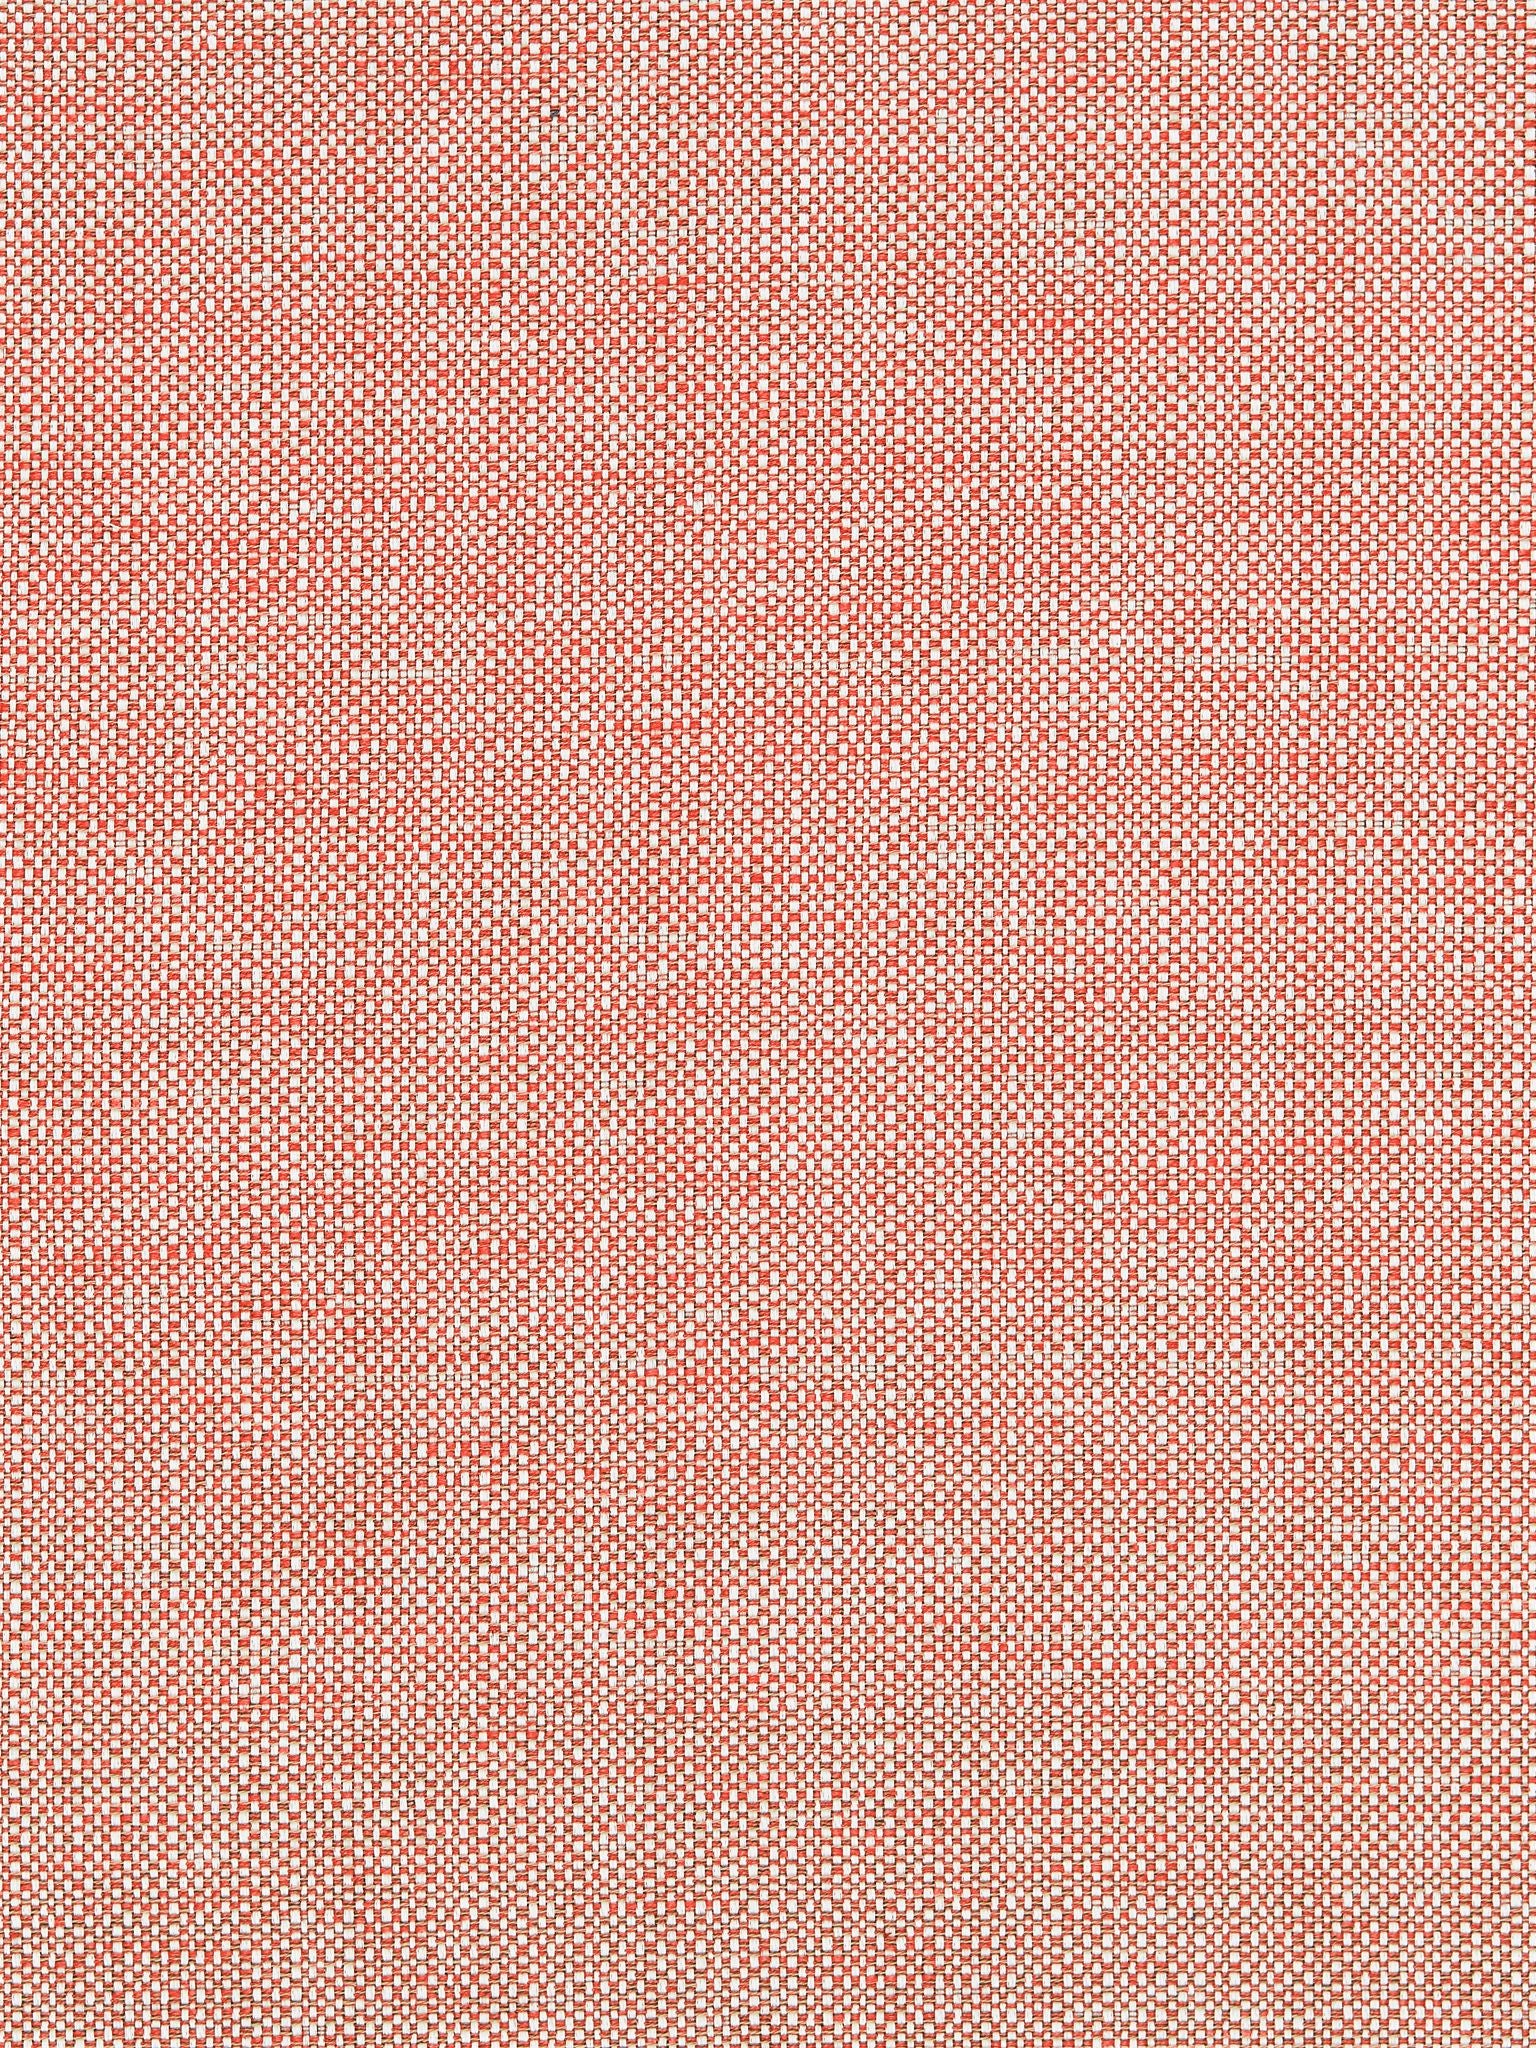 Chester Weave fabric in coral color - pattern number BK 0007K65118 - by Scalamandre in the Old World Weavers collection